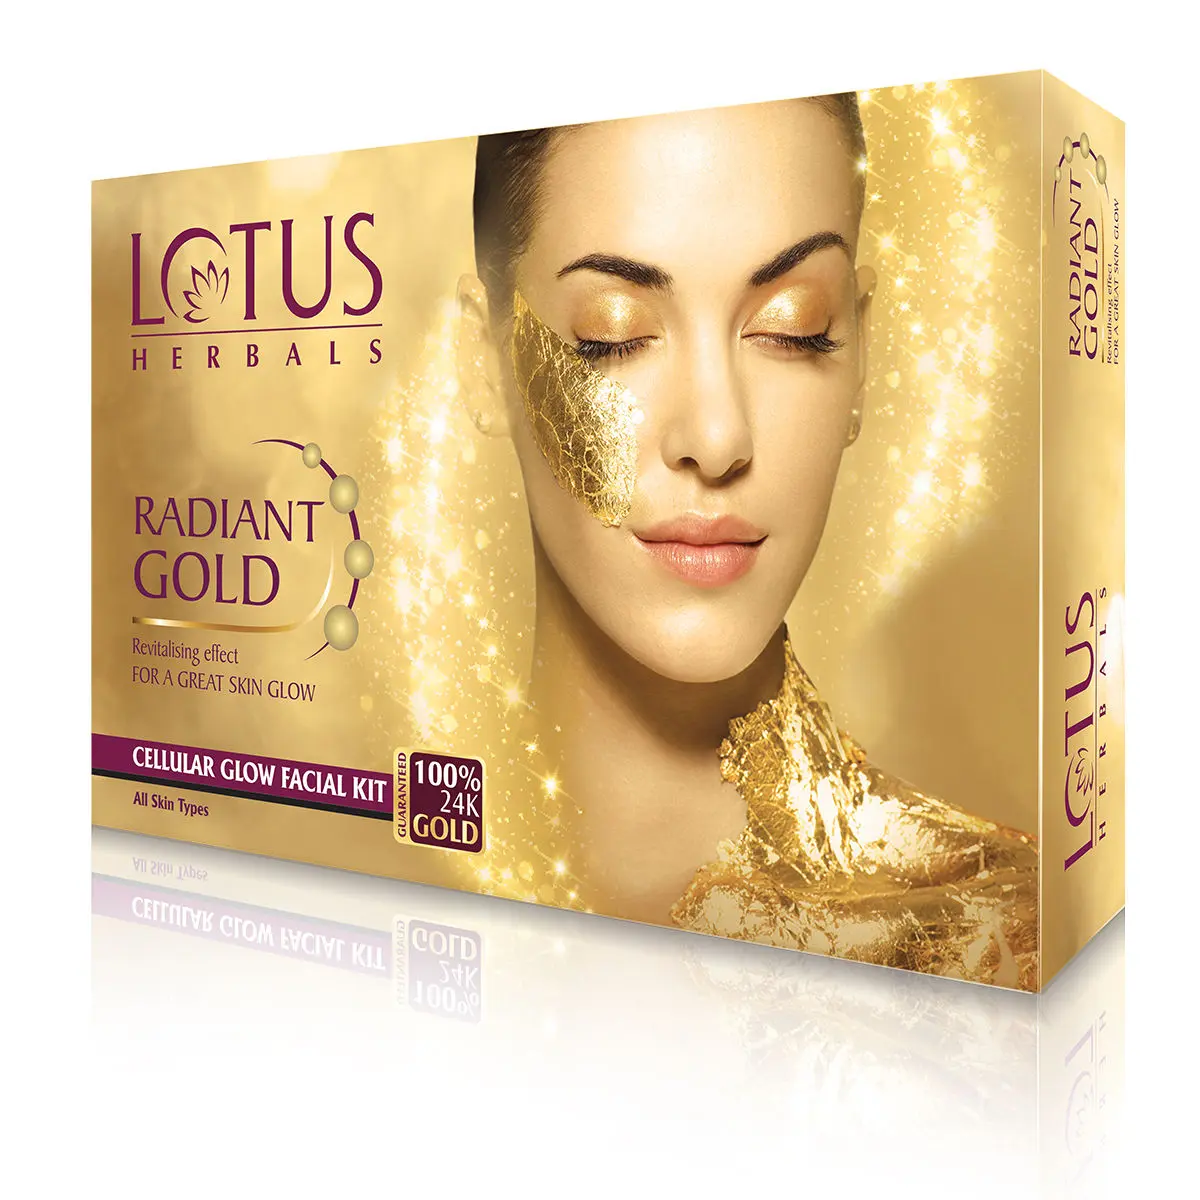 Lotus Herbals Radiant Gold Cellular Glow 1 Facial Kit | With 24K Gold leaves | For Skin Glow | All Skin Types | 37g